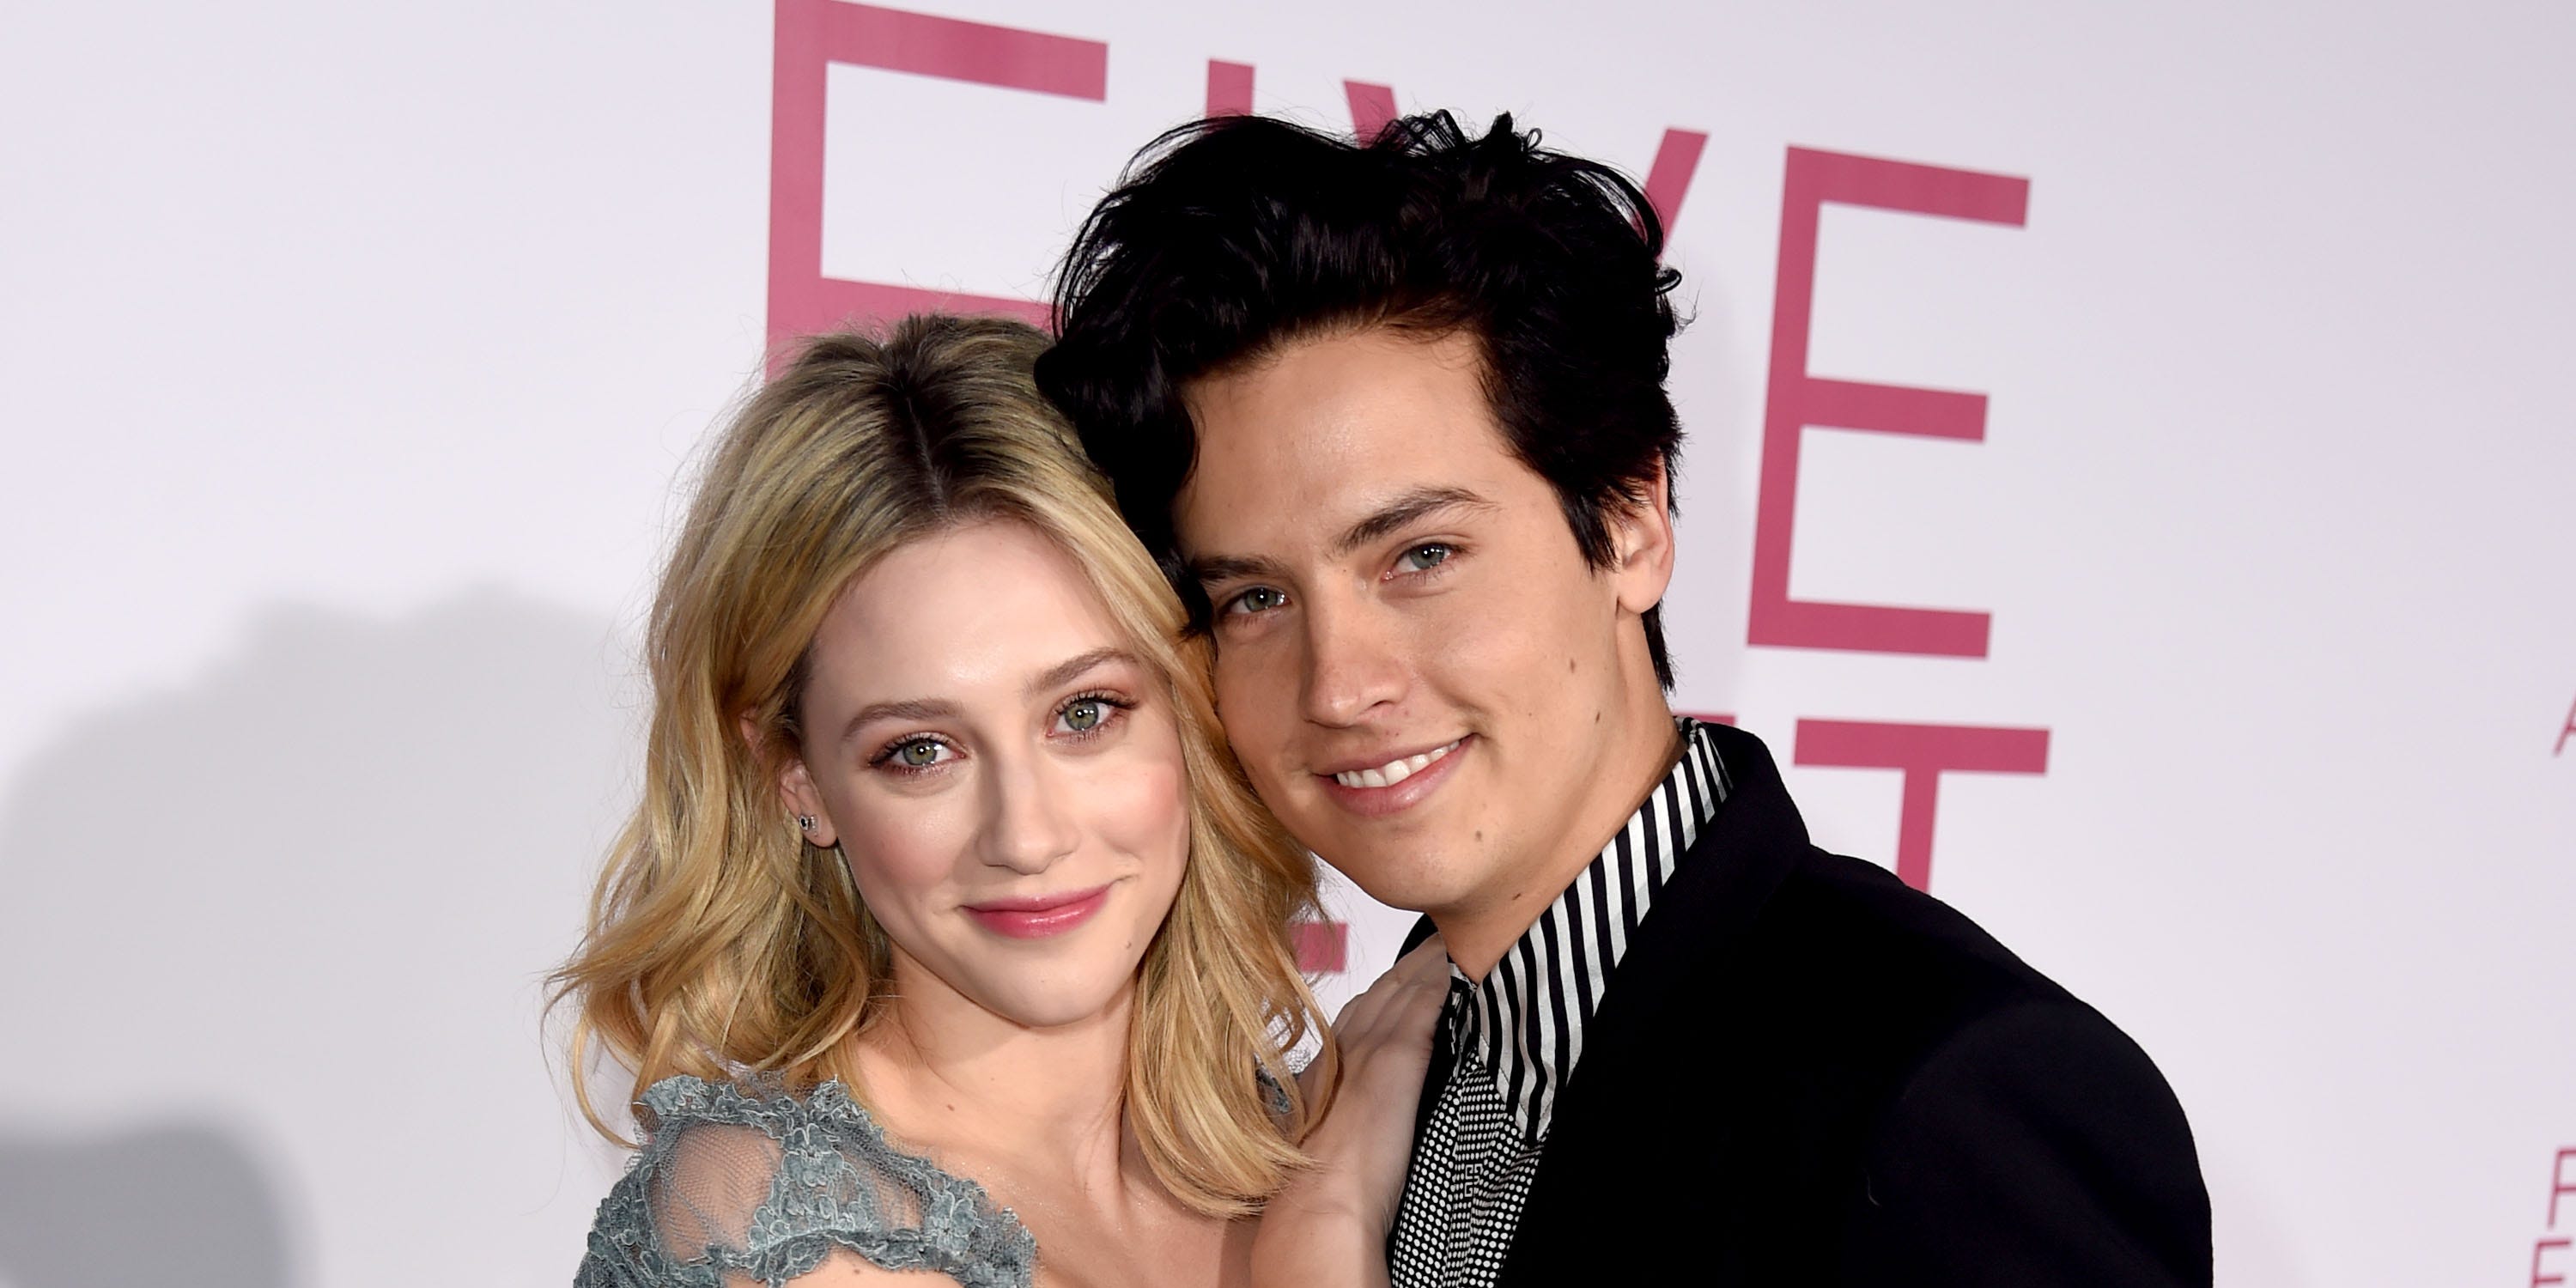 Cole Sprouse and Lili Reinhart’s Complete Relationship Timeline